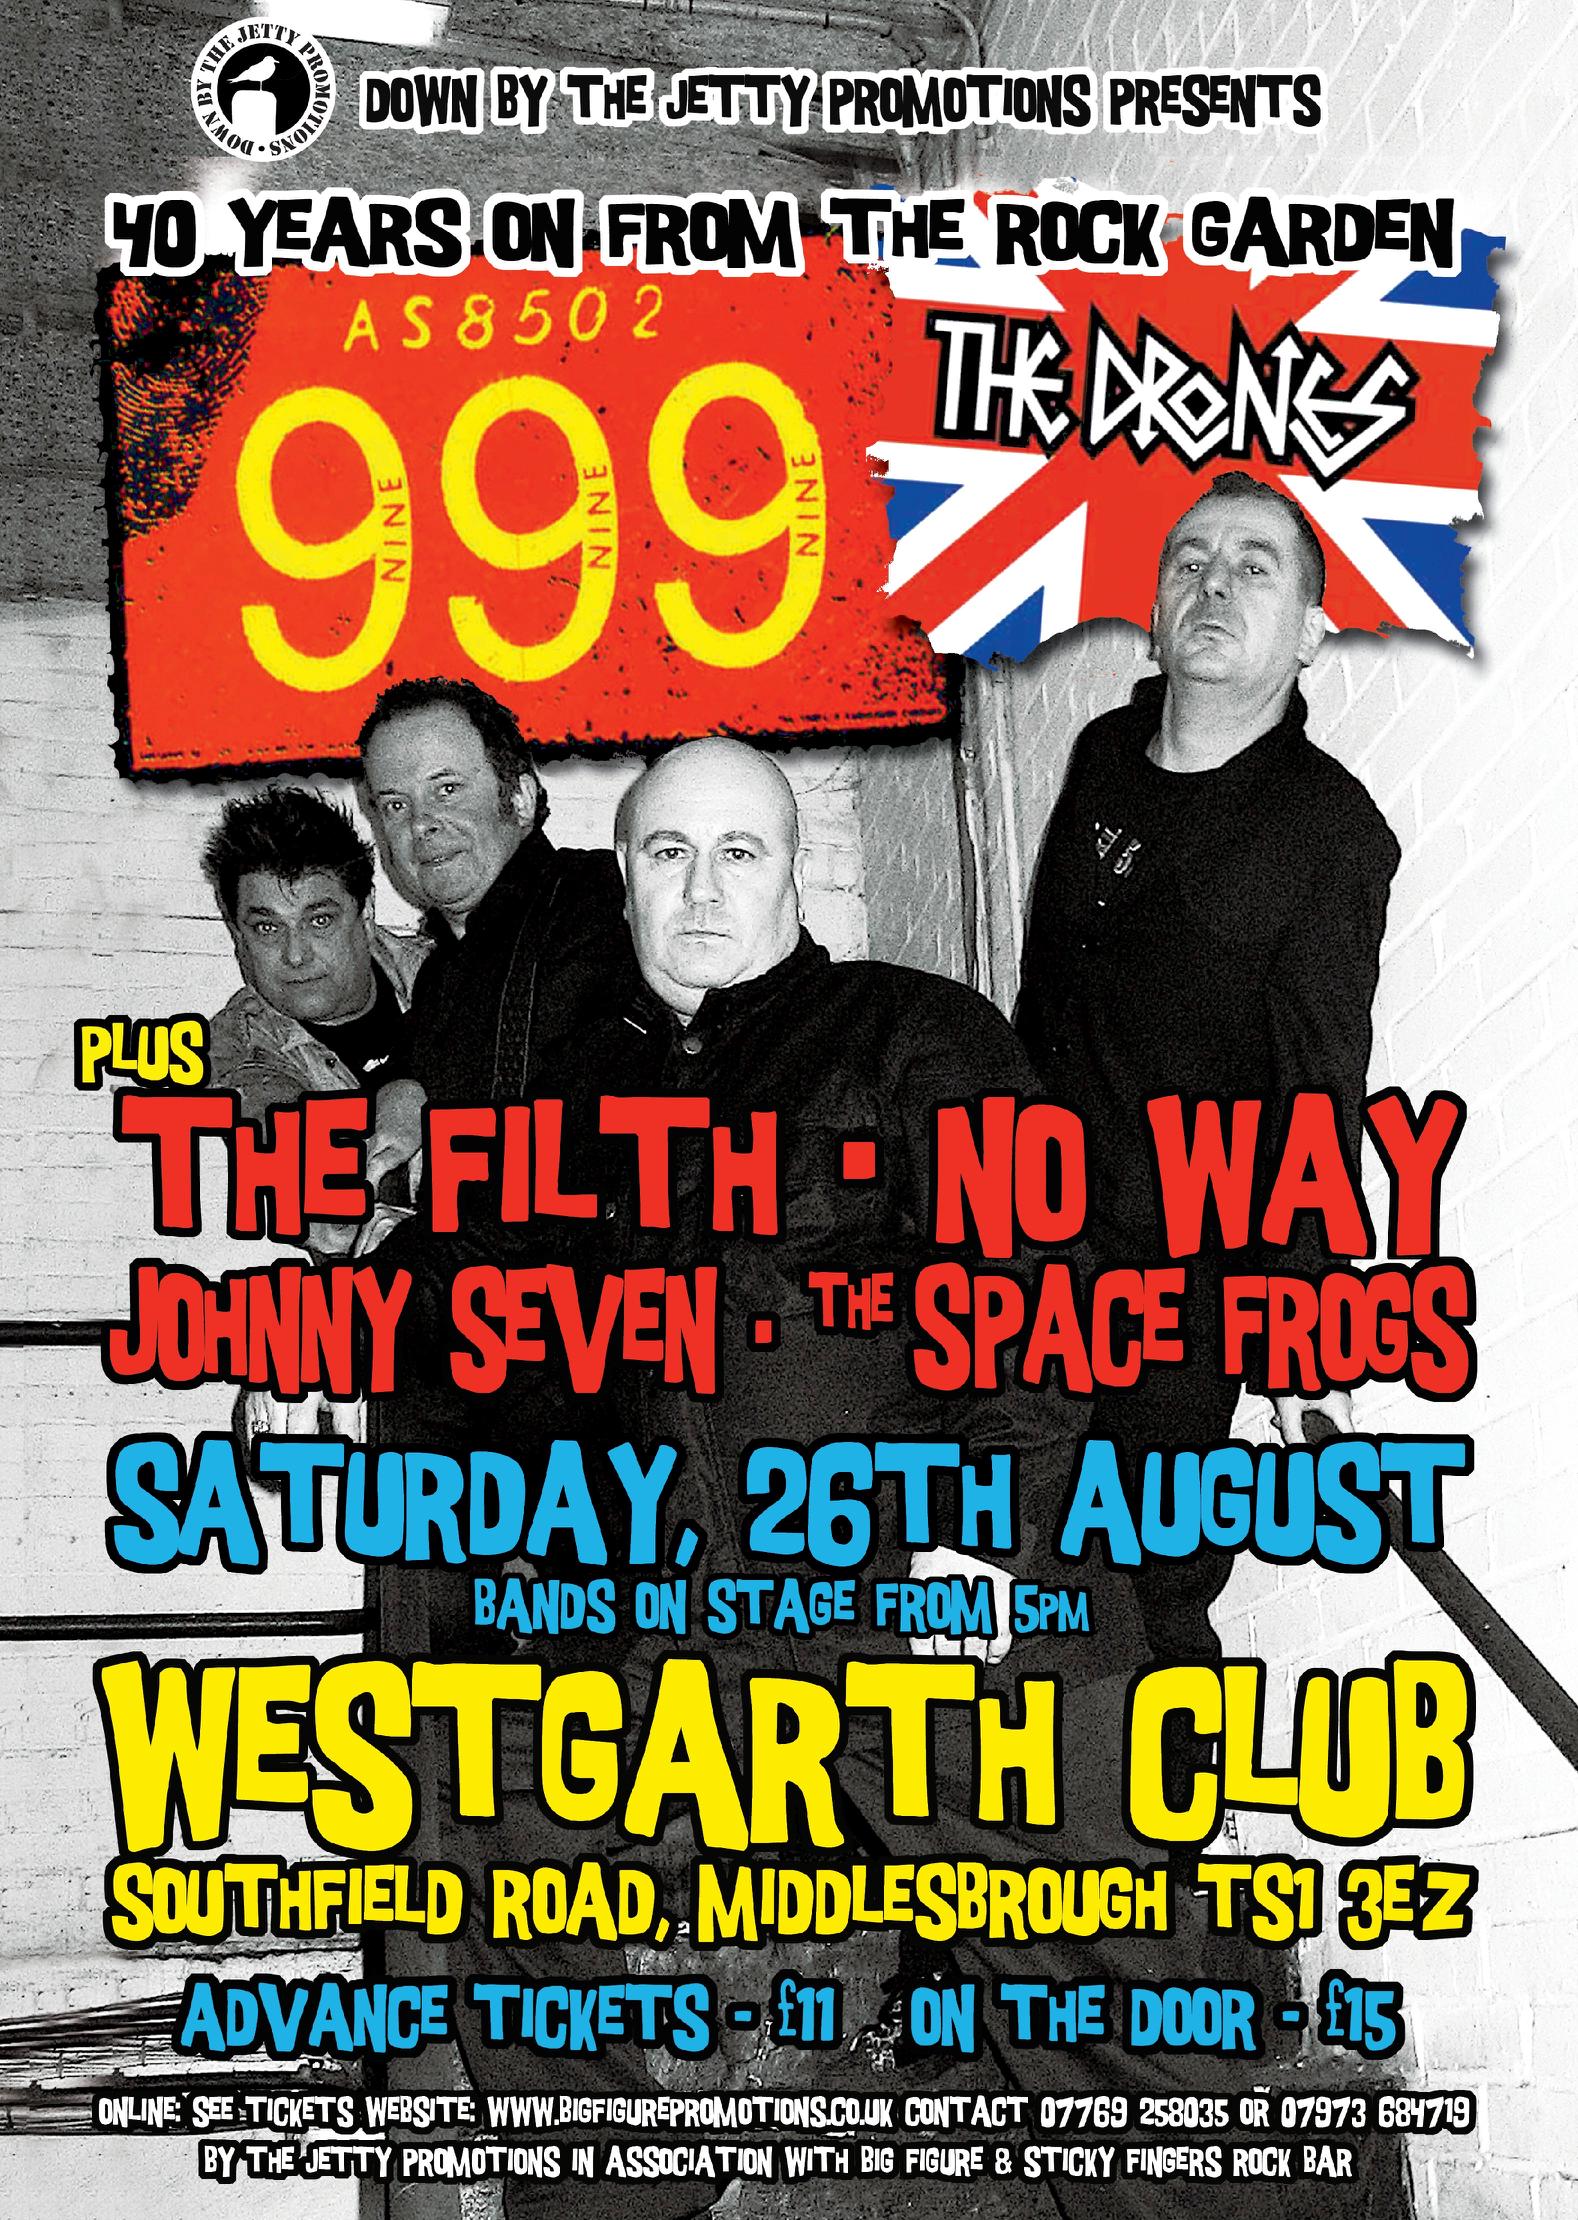 999 Live at the Westgarth Club